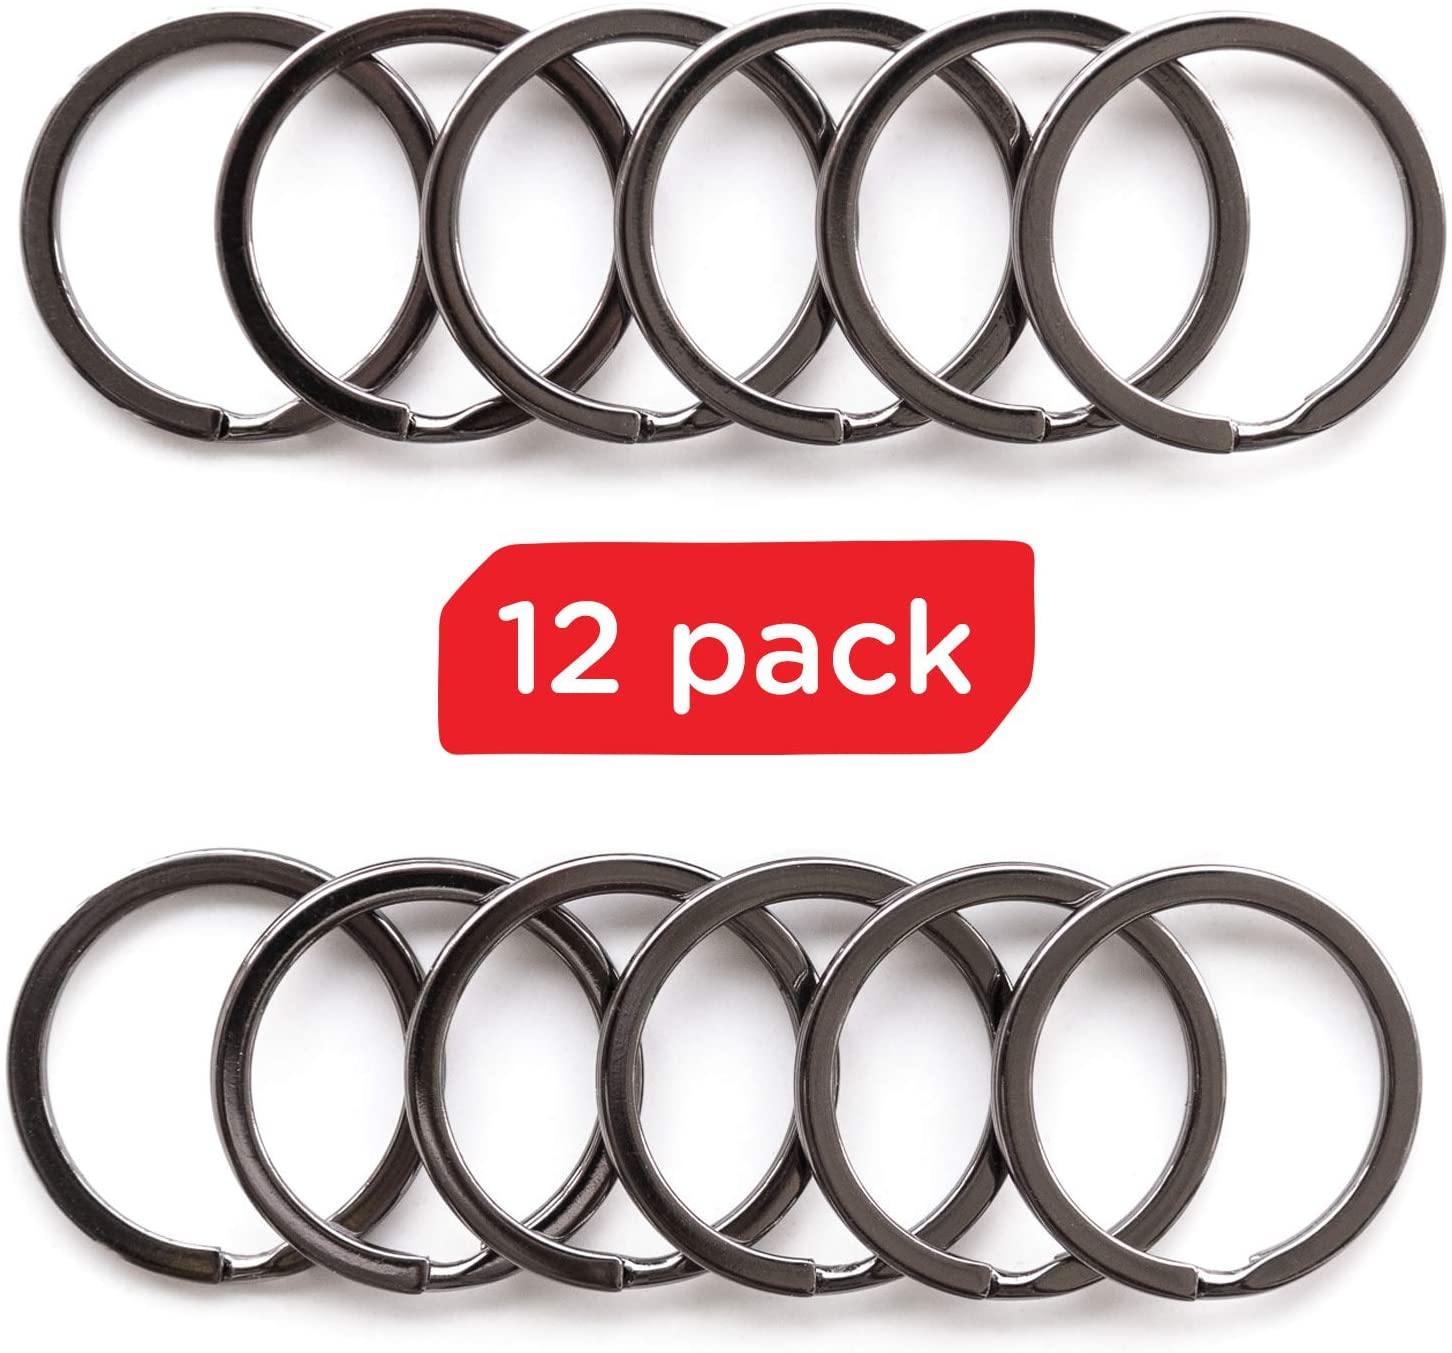 Cressi O-ring Holder Keychain With Punch